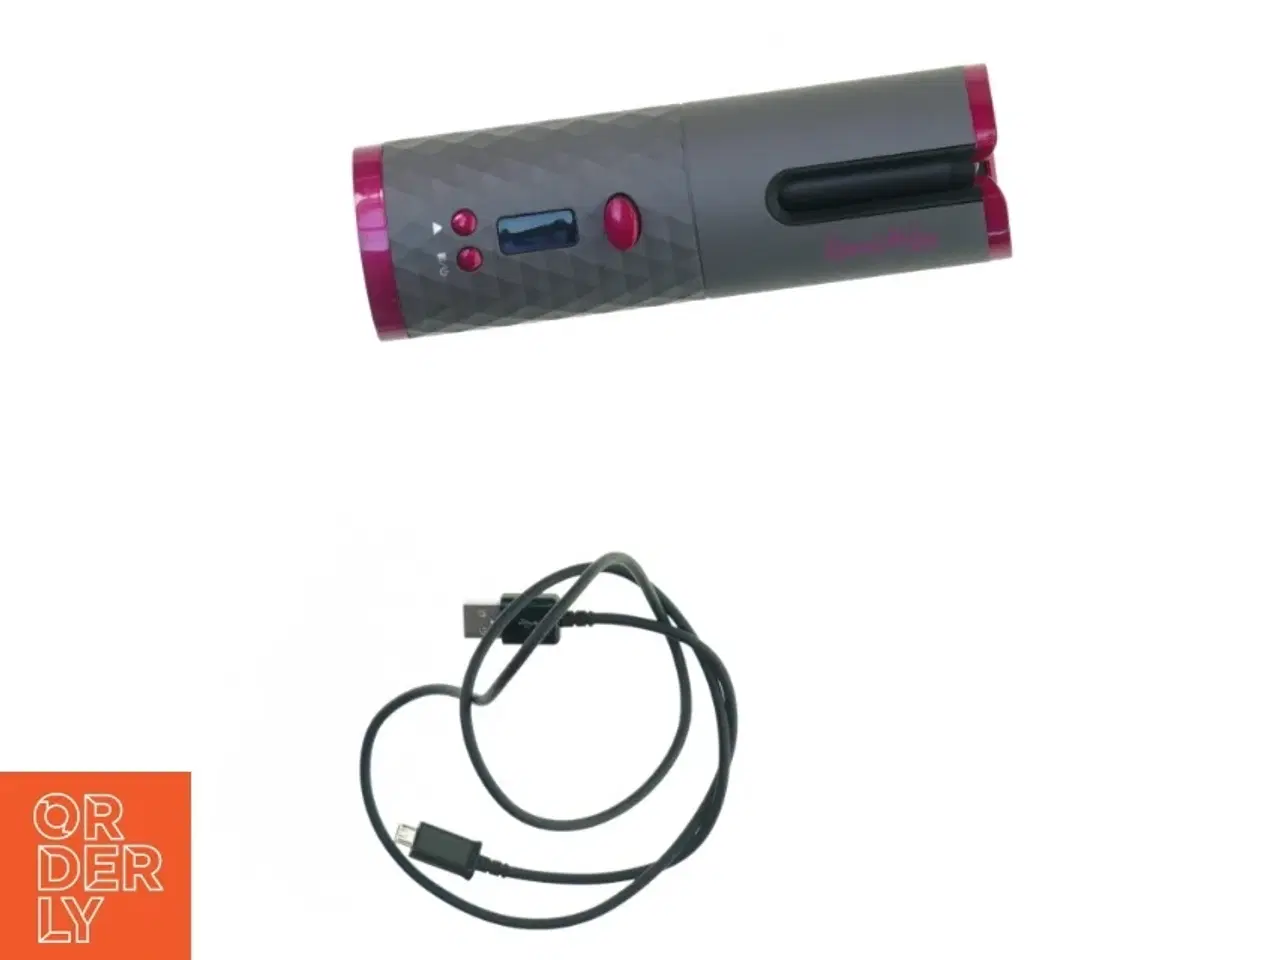 Billede 1 - Wireless and Rechargeable Hair Curler (str. 19 x 6 cm)